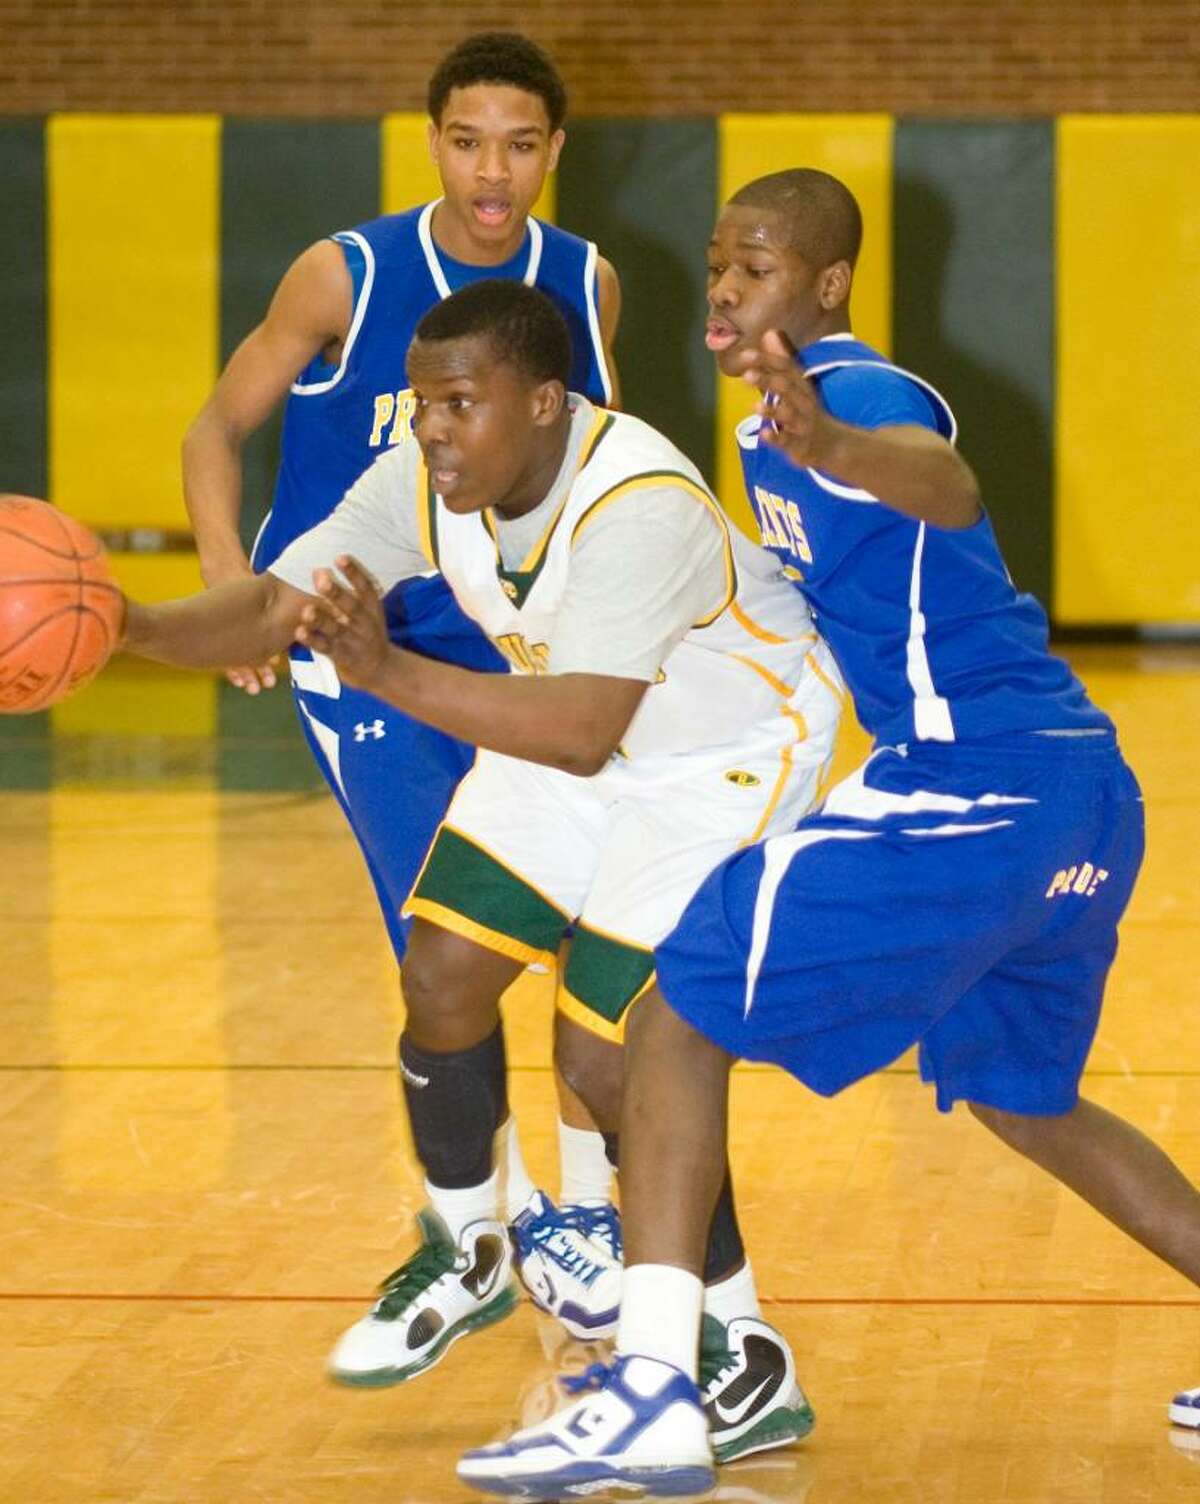 Trinity Catholic High School's #2 Phil Thompson, center, is defended by Harding High School's Corey Baldwin, left, and Kintwan Miles, right, during a boys basketball game in Stamford, CT on Jan. 29, 2010. 2